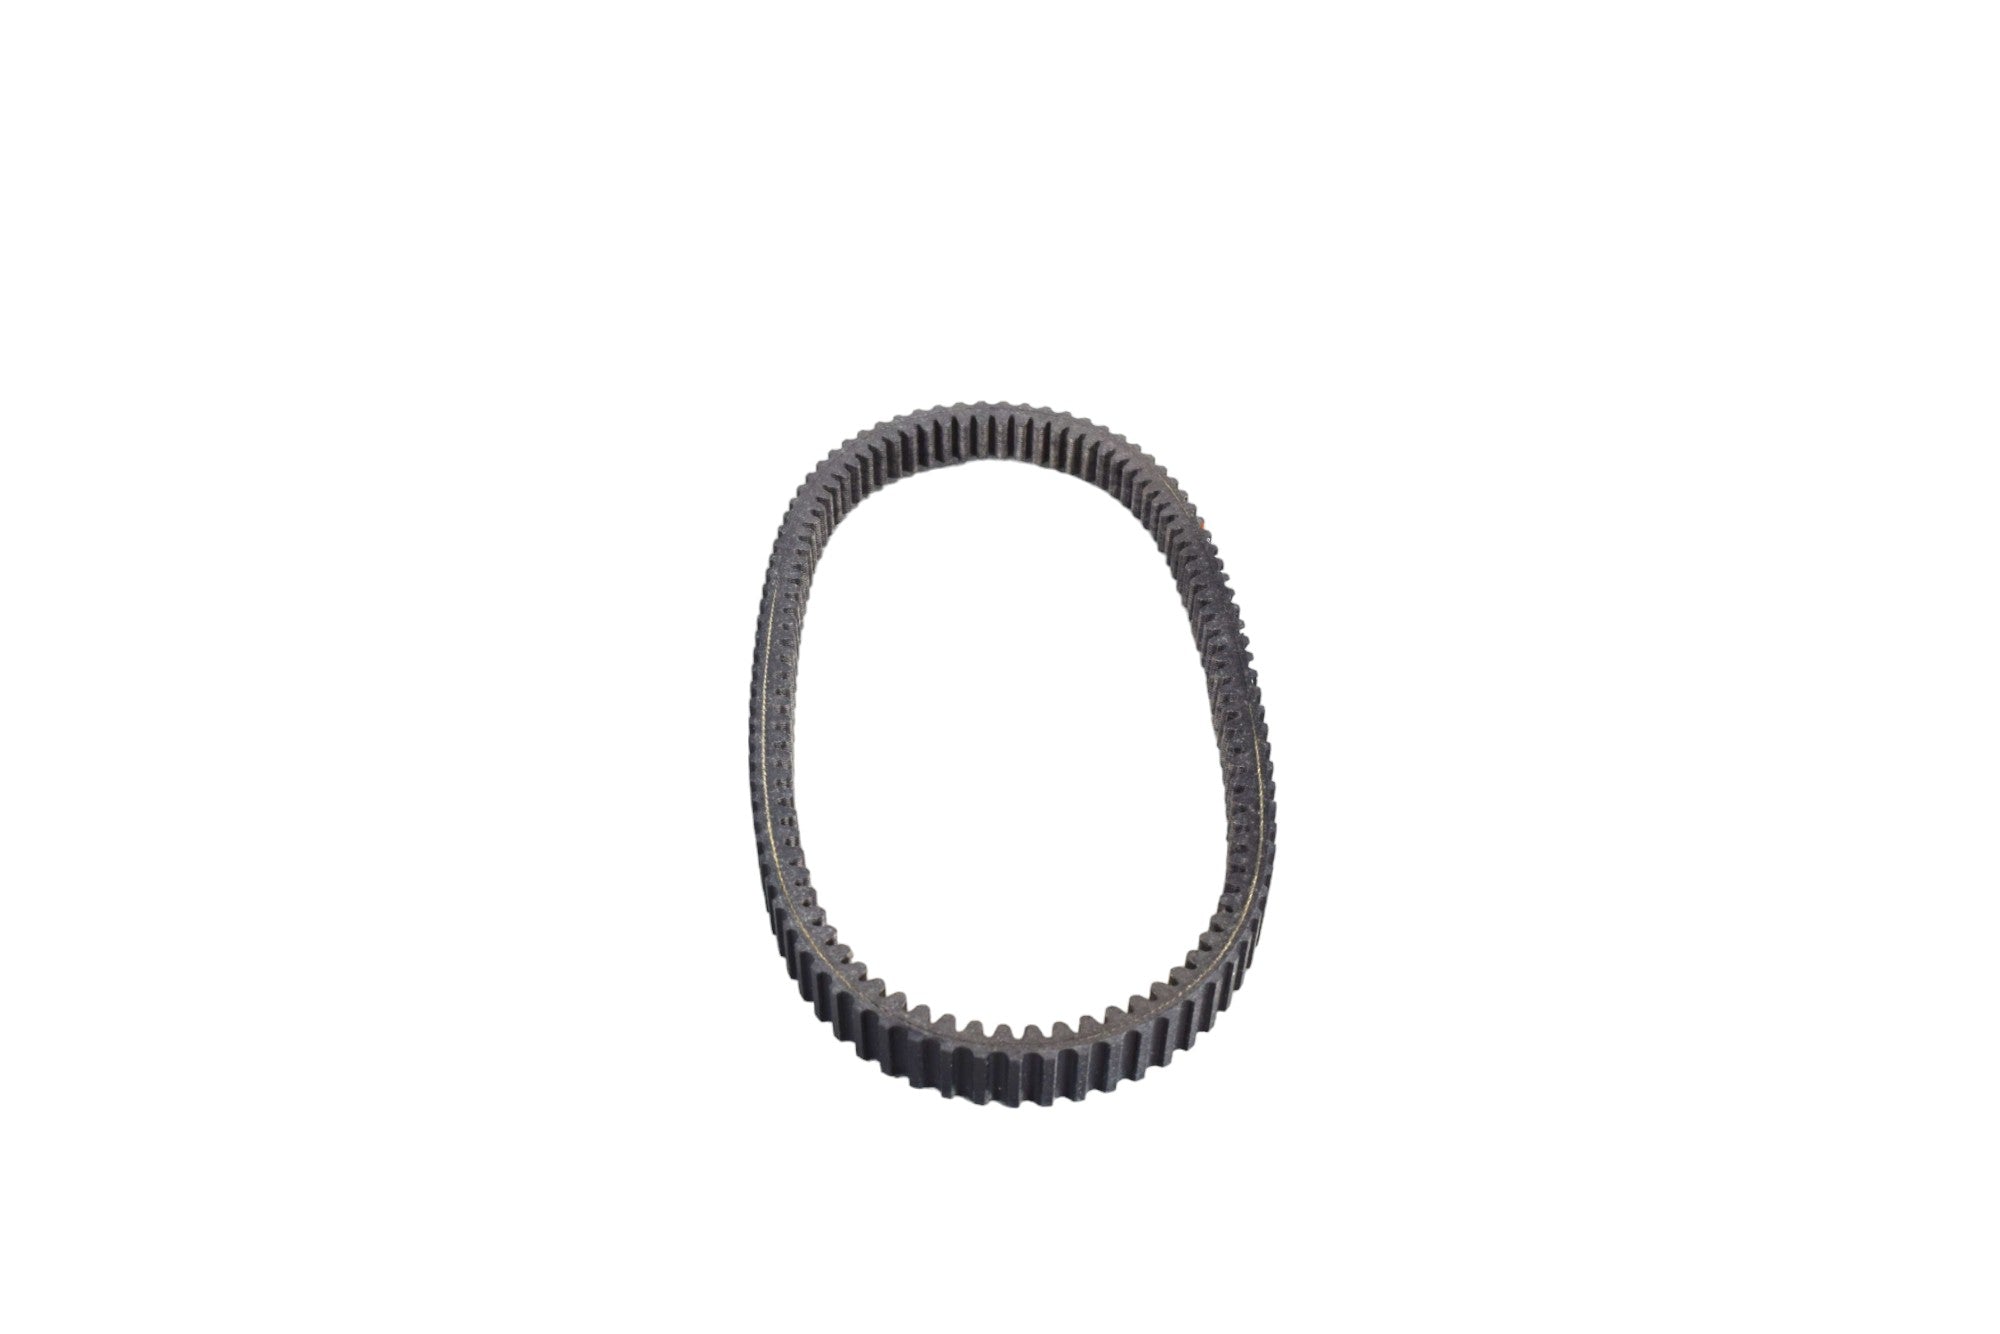 Ultimax UXP451 Drive Belt for Kawasaki Mule OEM Replacement for 59011-0011 (Made in USA)